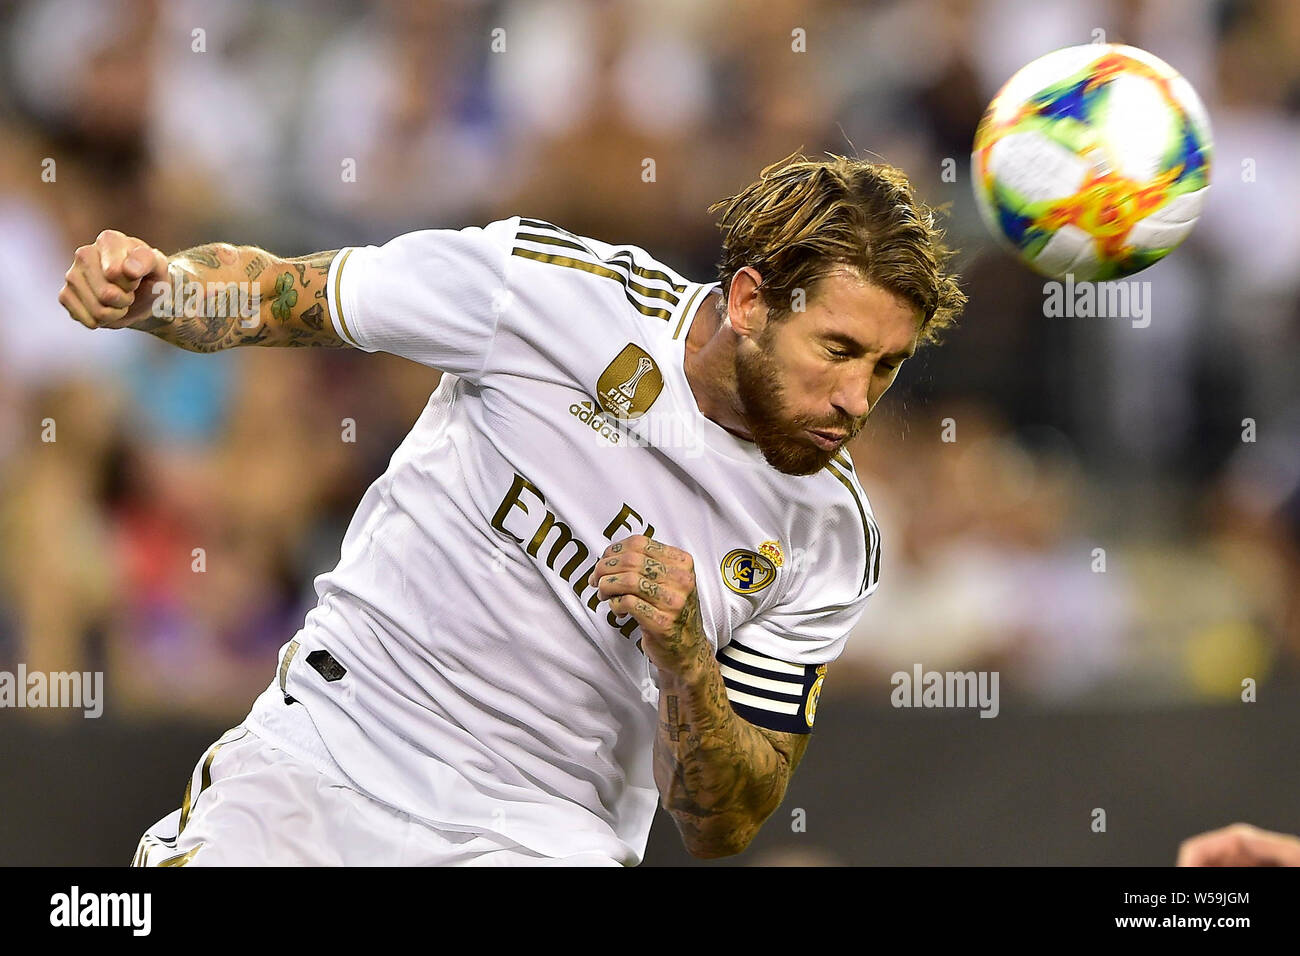 East Rutherford, New Jersey, USA. 26th July, 2019. Real Madrid defender  SERGIO RAMOS (4) in action during the International Champions Cup match at  MetLife Stadium in East Rutherford New Jersey Atletico Madrid